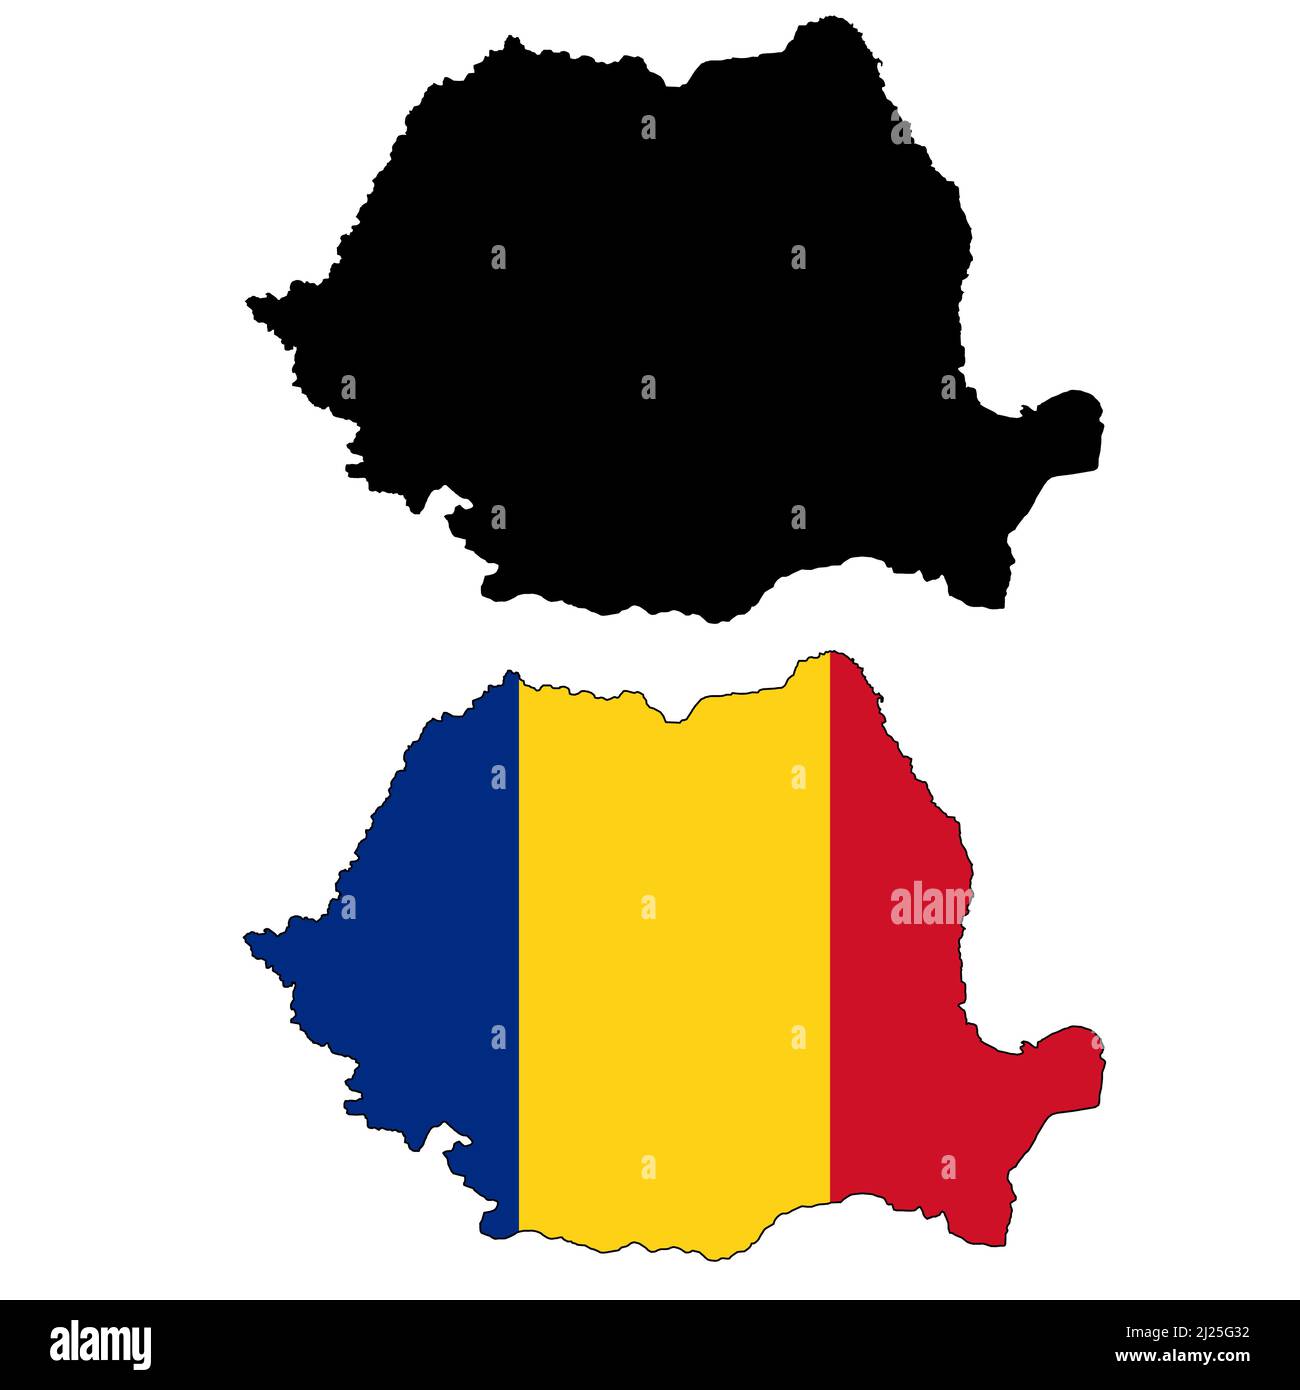 Detailed map of Romania on white background. Romania map colored with flag colors. flat style. Stock Photo